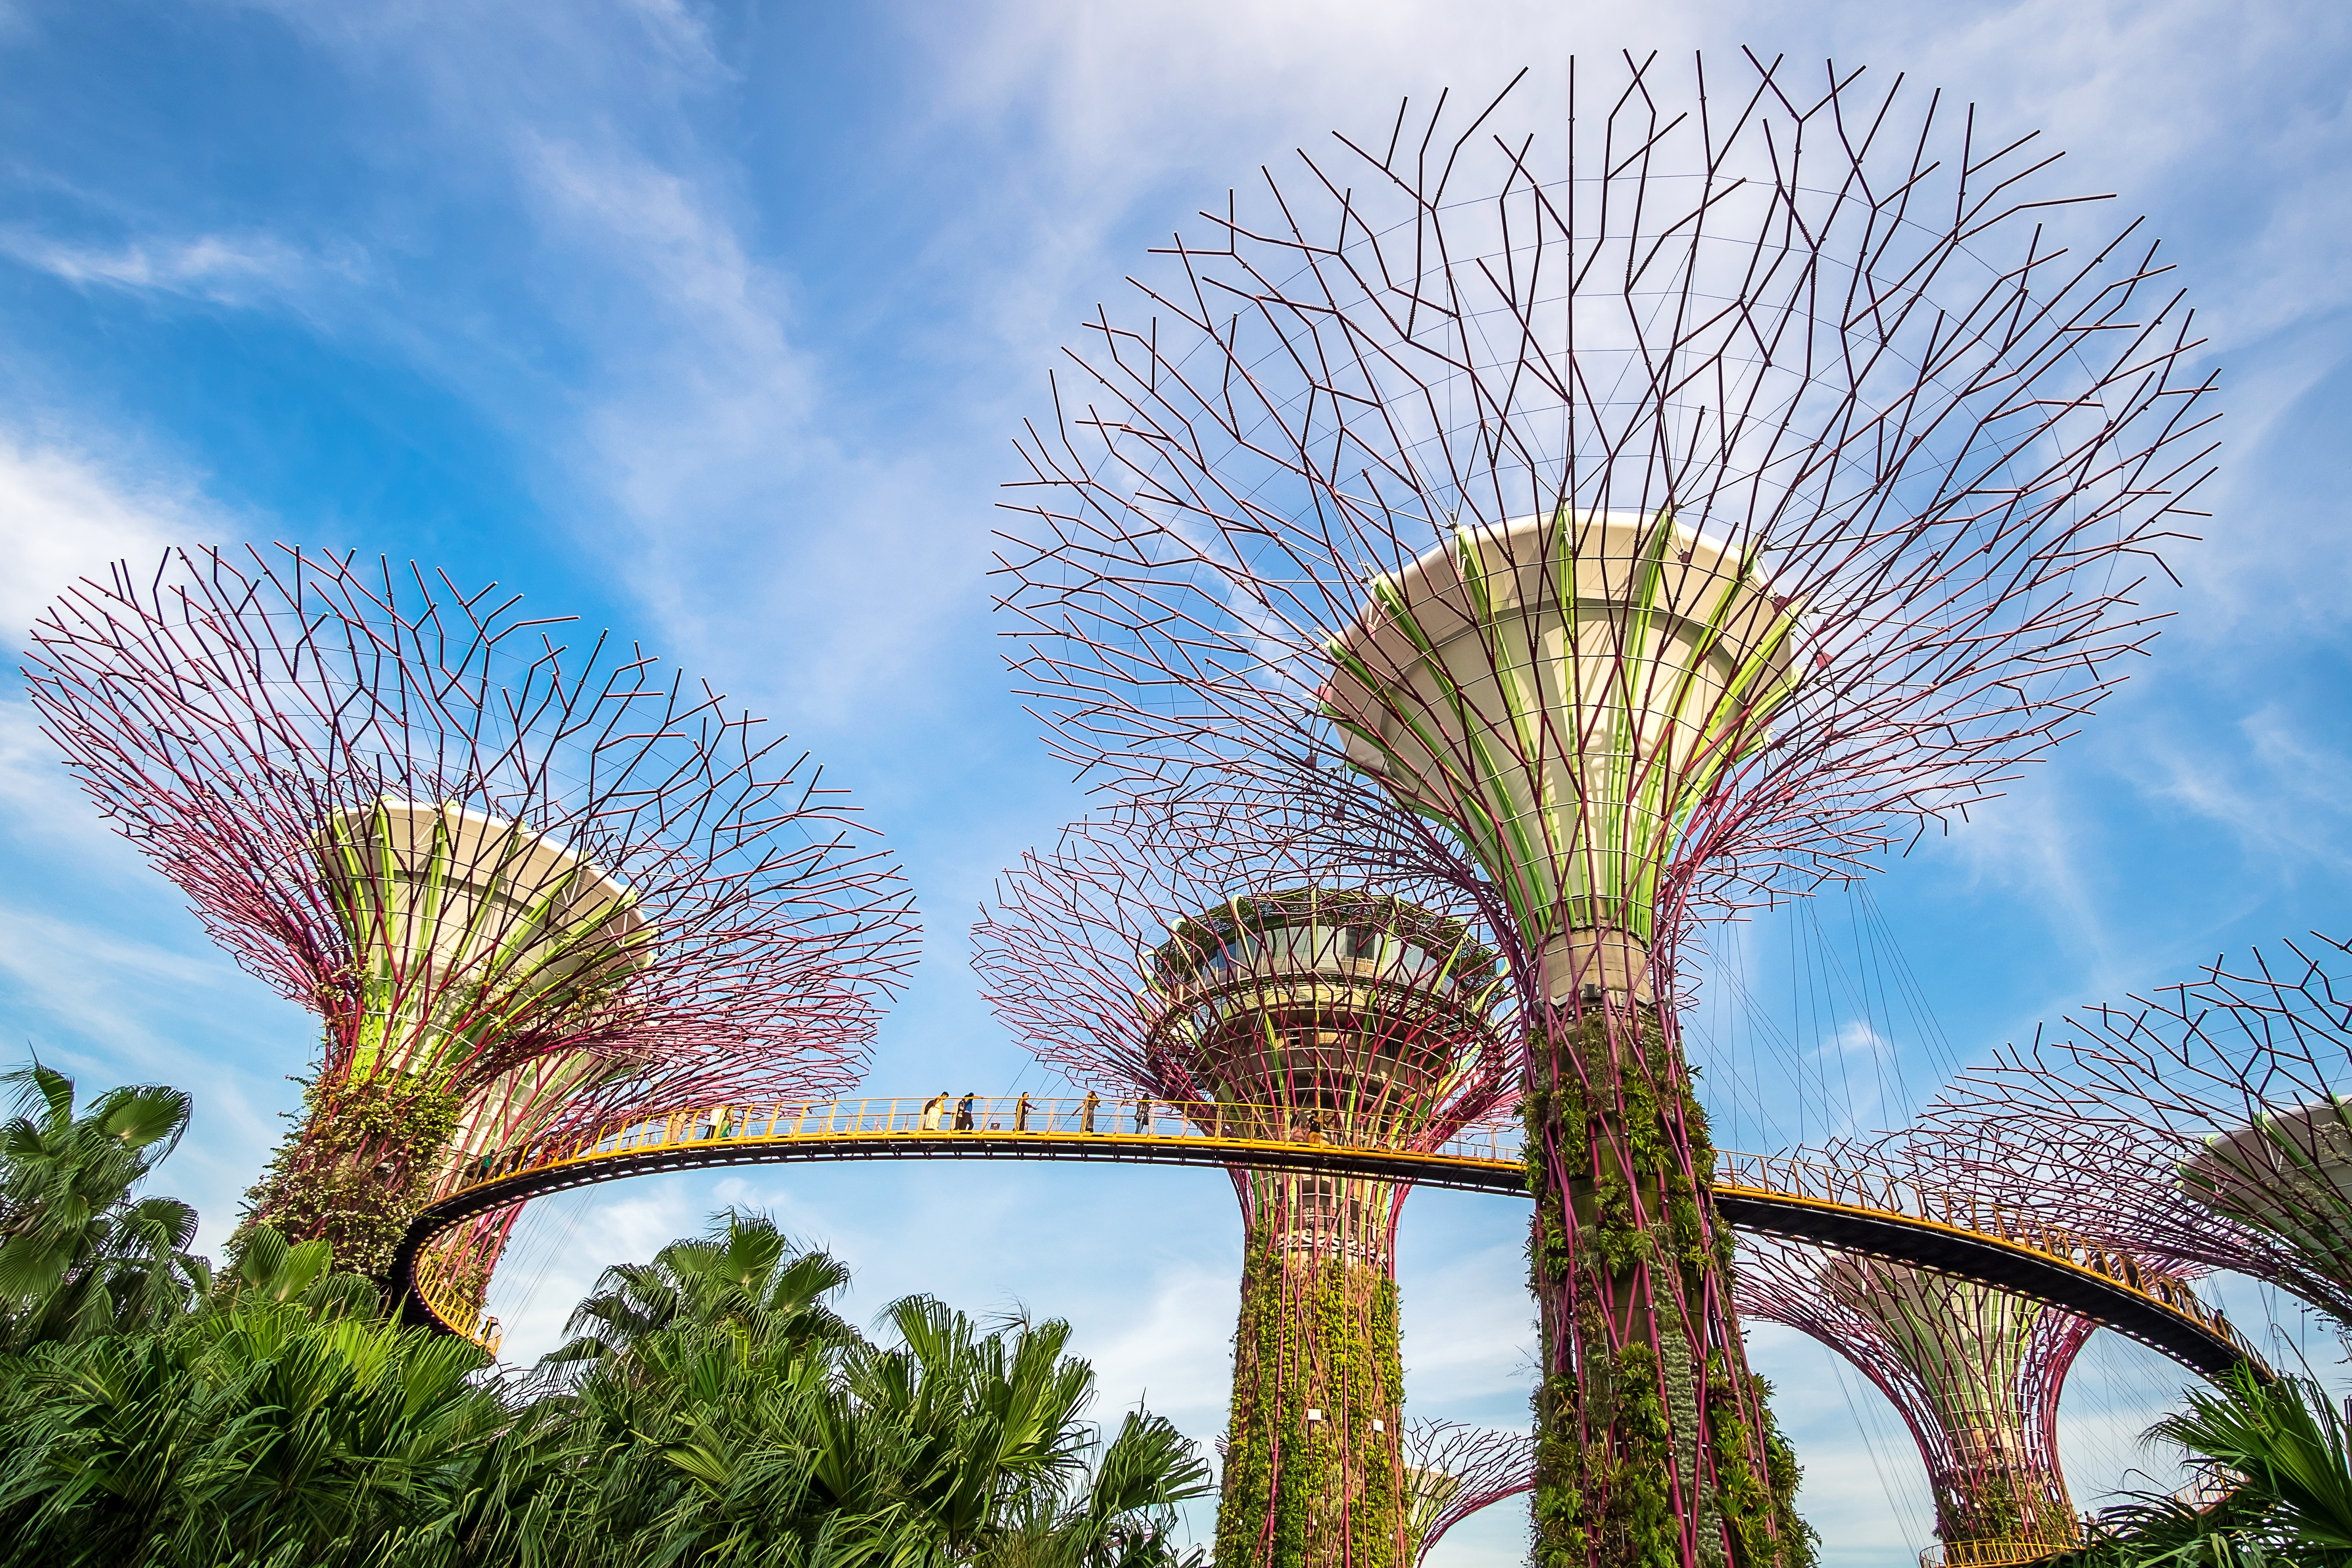 The Supertree grove at gardens by the bay with Marina Bay Sands hotel in Singapore. landmark